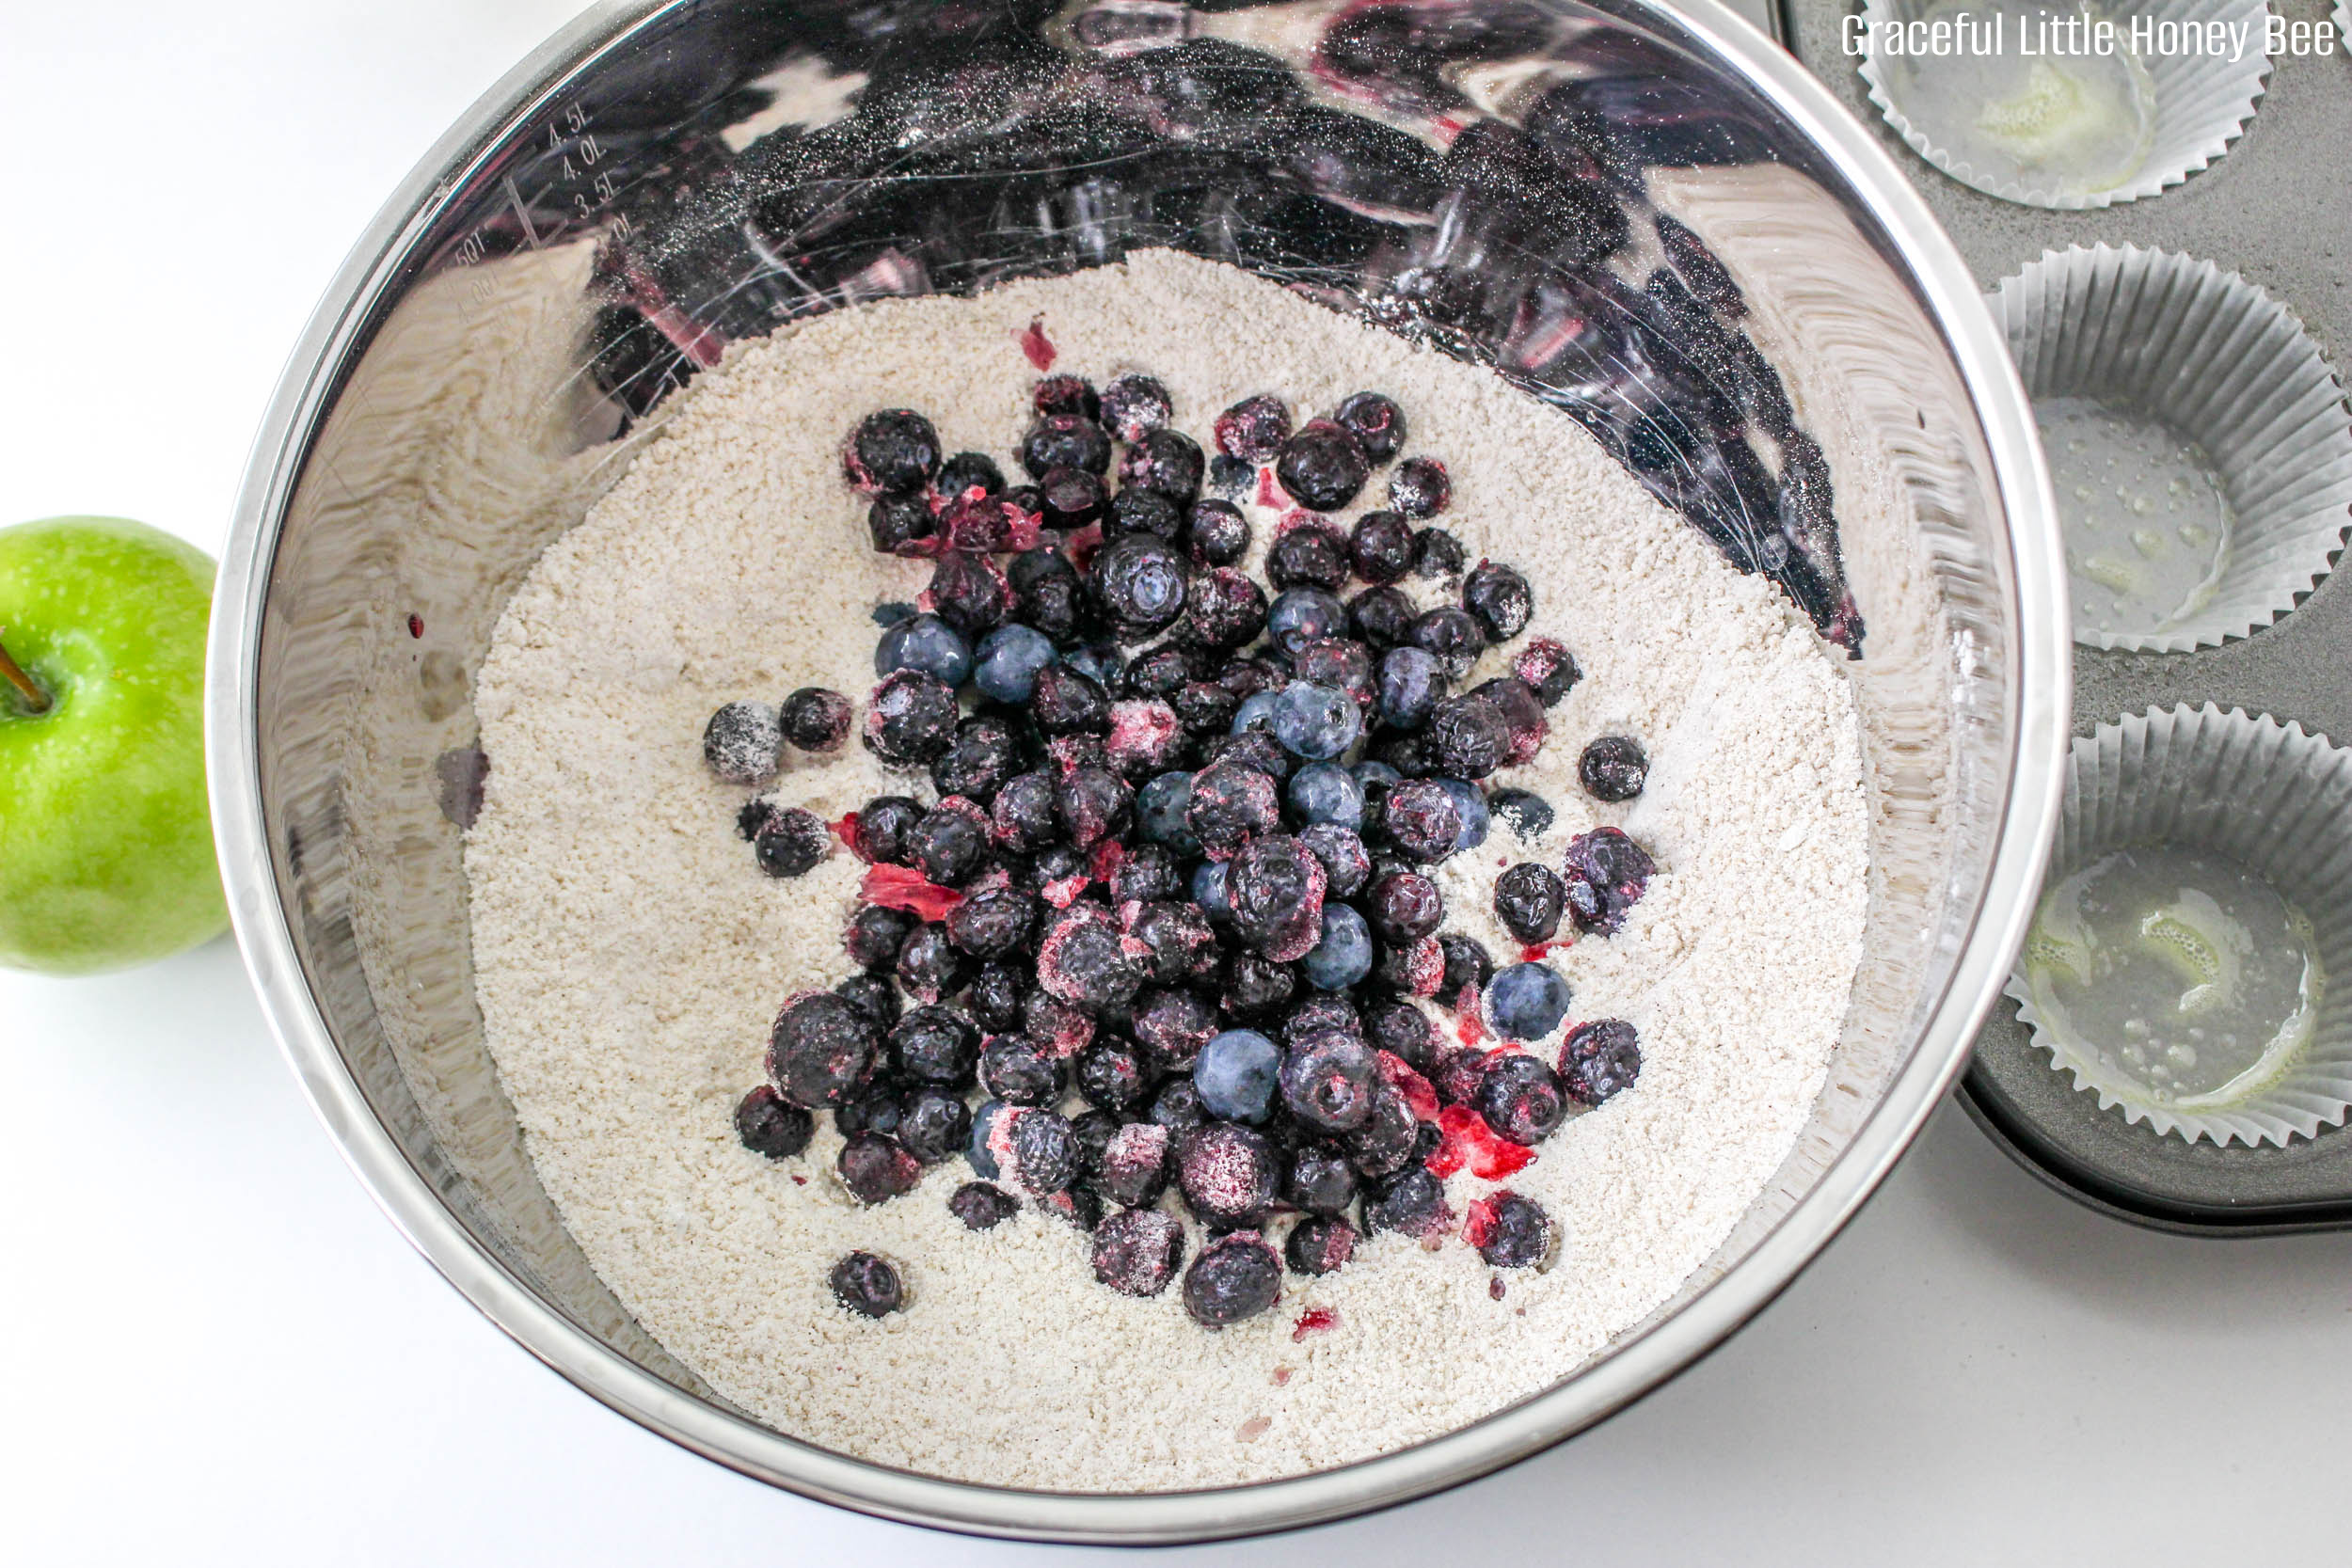 Dry ingredients with blueberries in a metal mixing bowl.